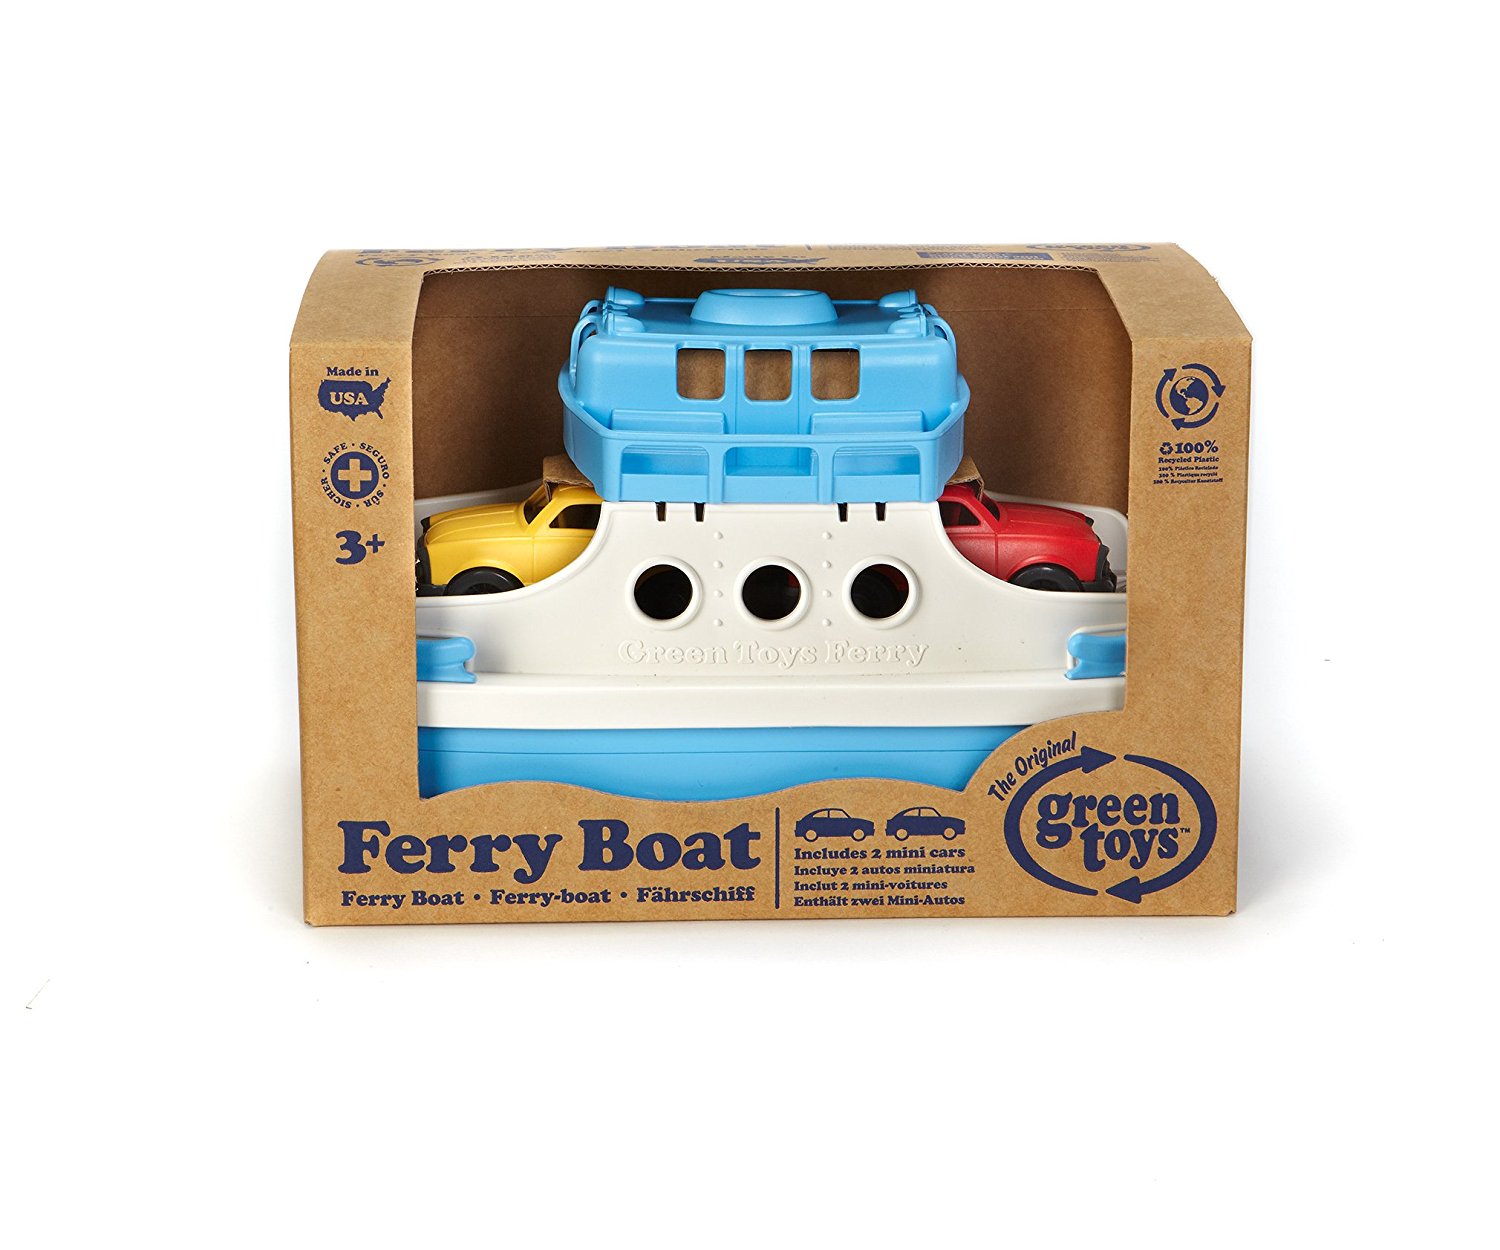 phthalates PVC Recycled Plastic Dishwasher Safe No BPA Blue/White CB Pretend Play Green Toys Ferry Boat Kids Bath Toy Floating Vehicle Made in USA. Motor Skills 